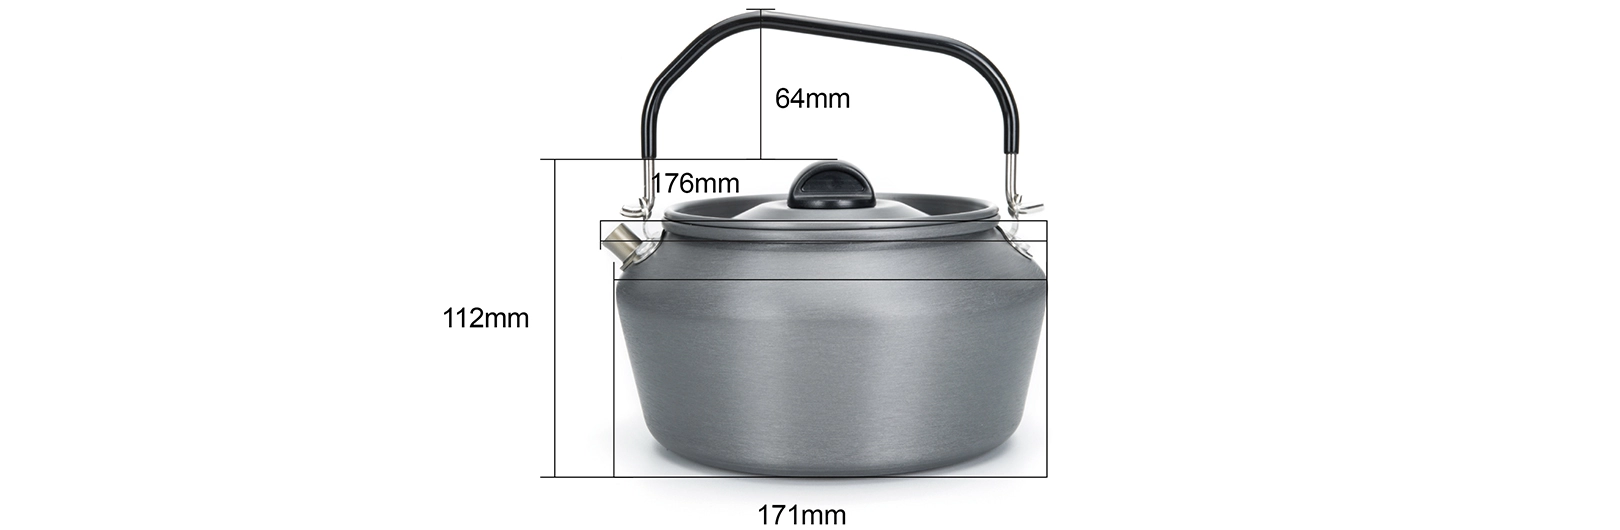 details of Camping Kettle Coffee Teapot for Lightweight Backpacking Stove LFGB Approval